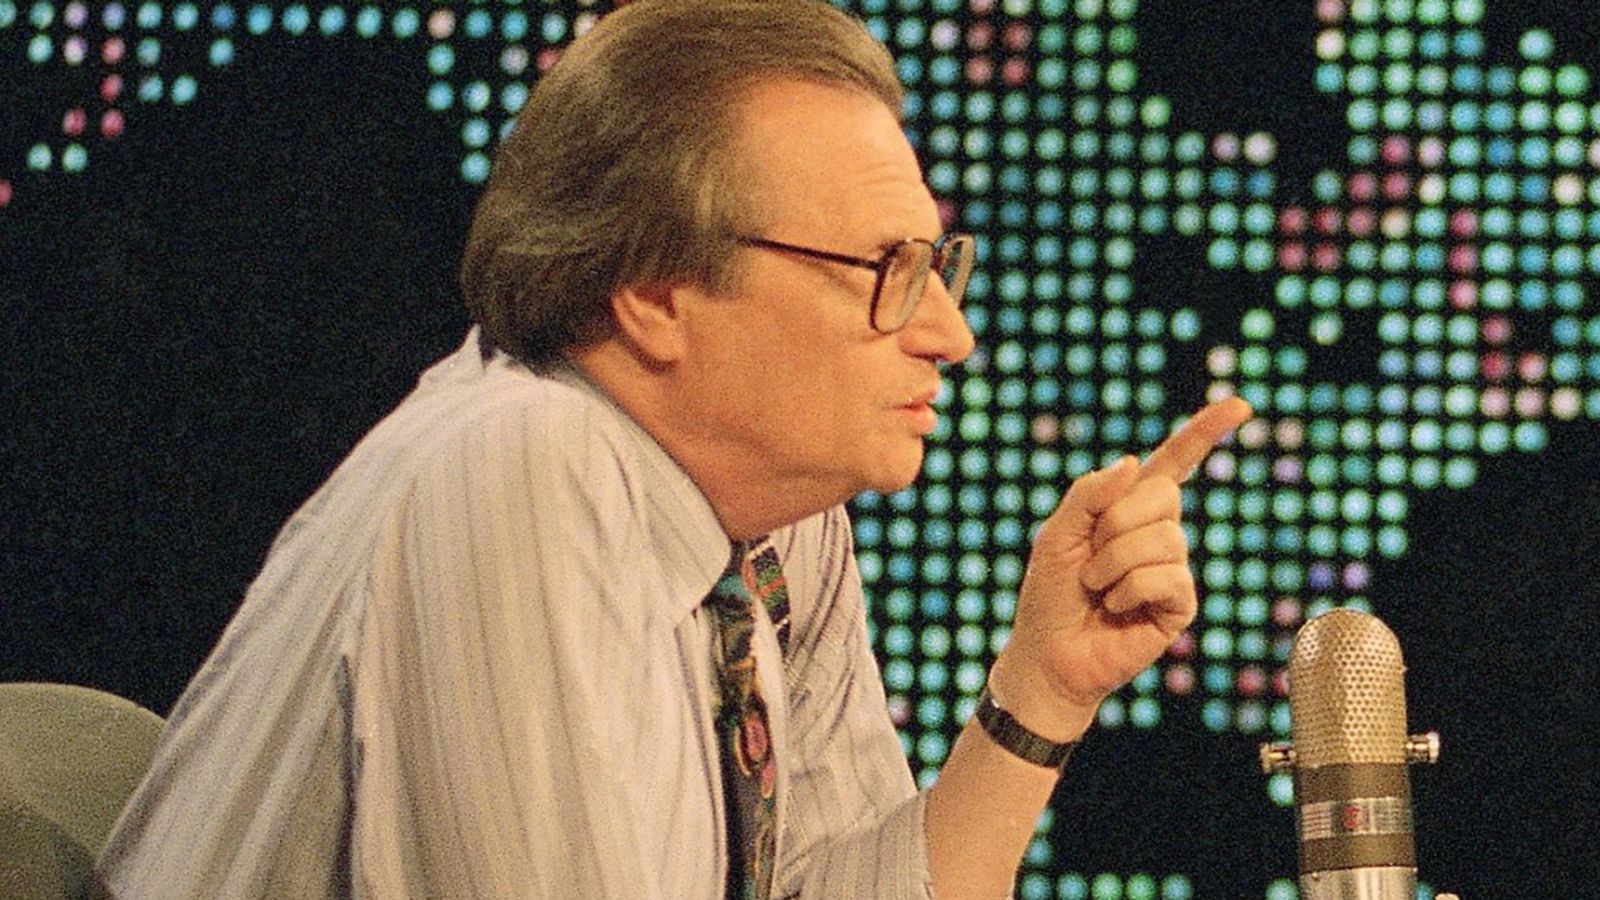 Larry King: Veteran talk show host in hospital with COVID-19